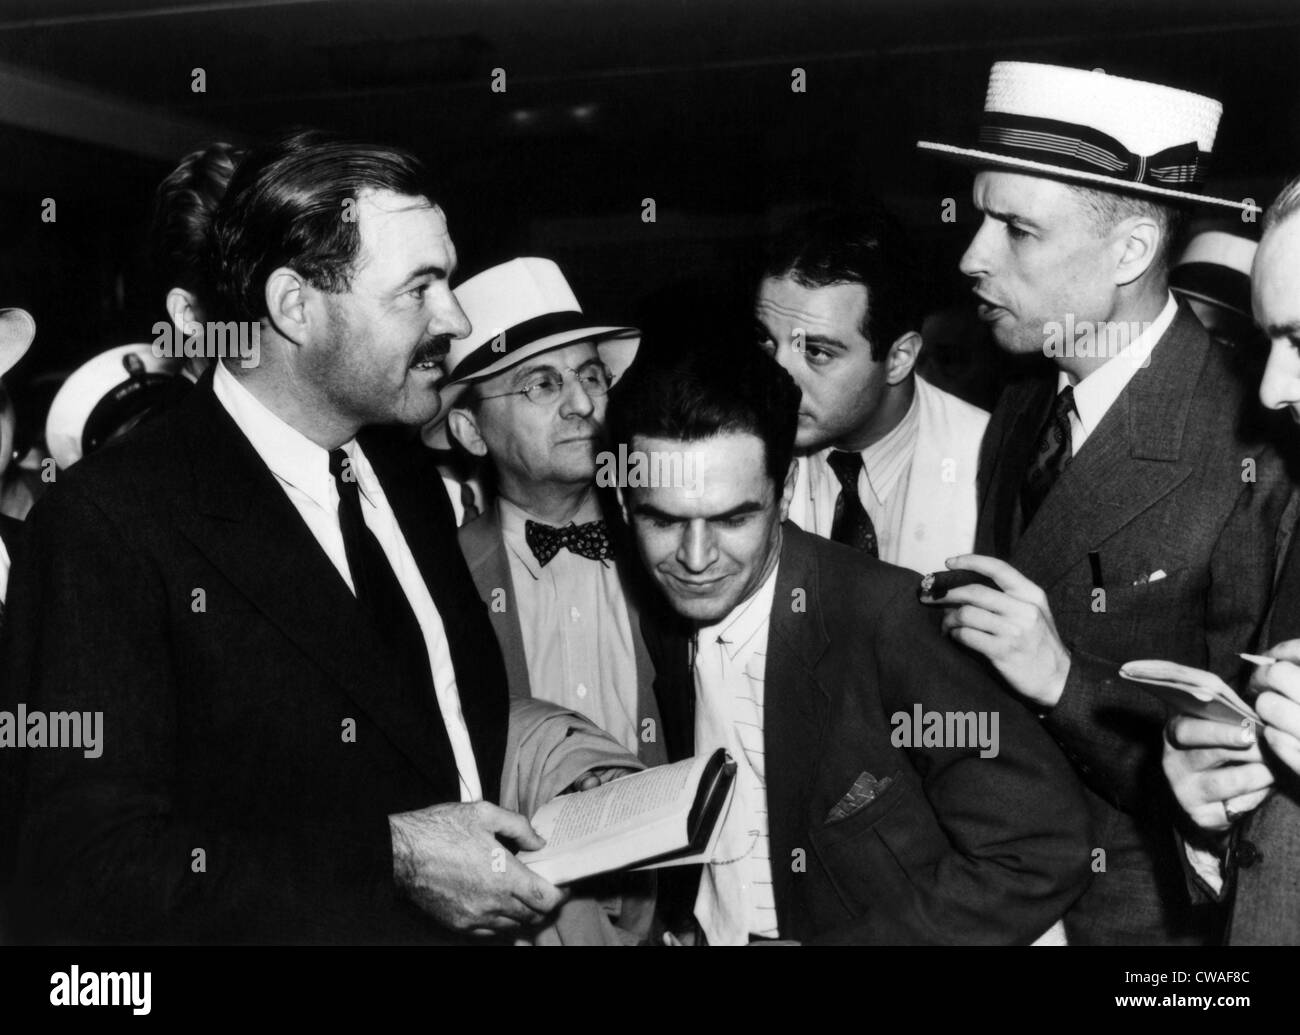 Ernest Hemingway being interviewed in the press before returning to the Spanish Civil War, New York City August 1937.Courtesy Stock Photo